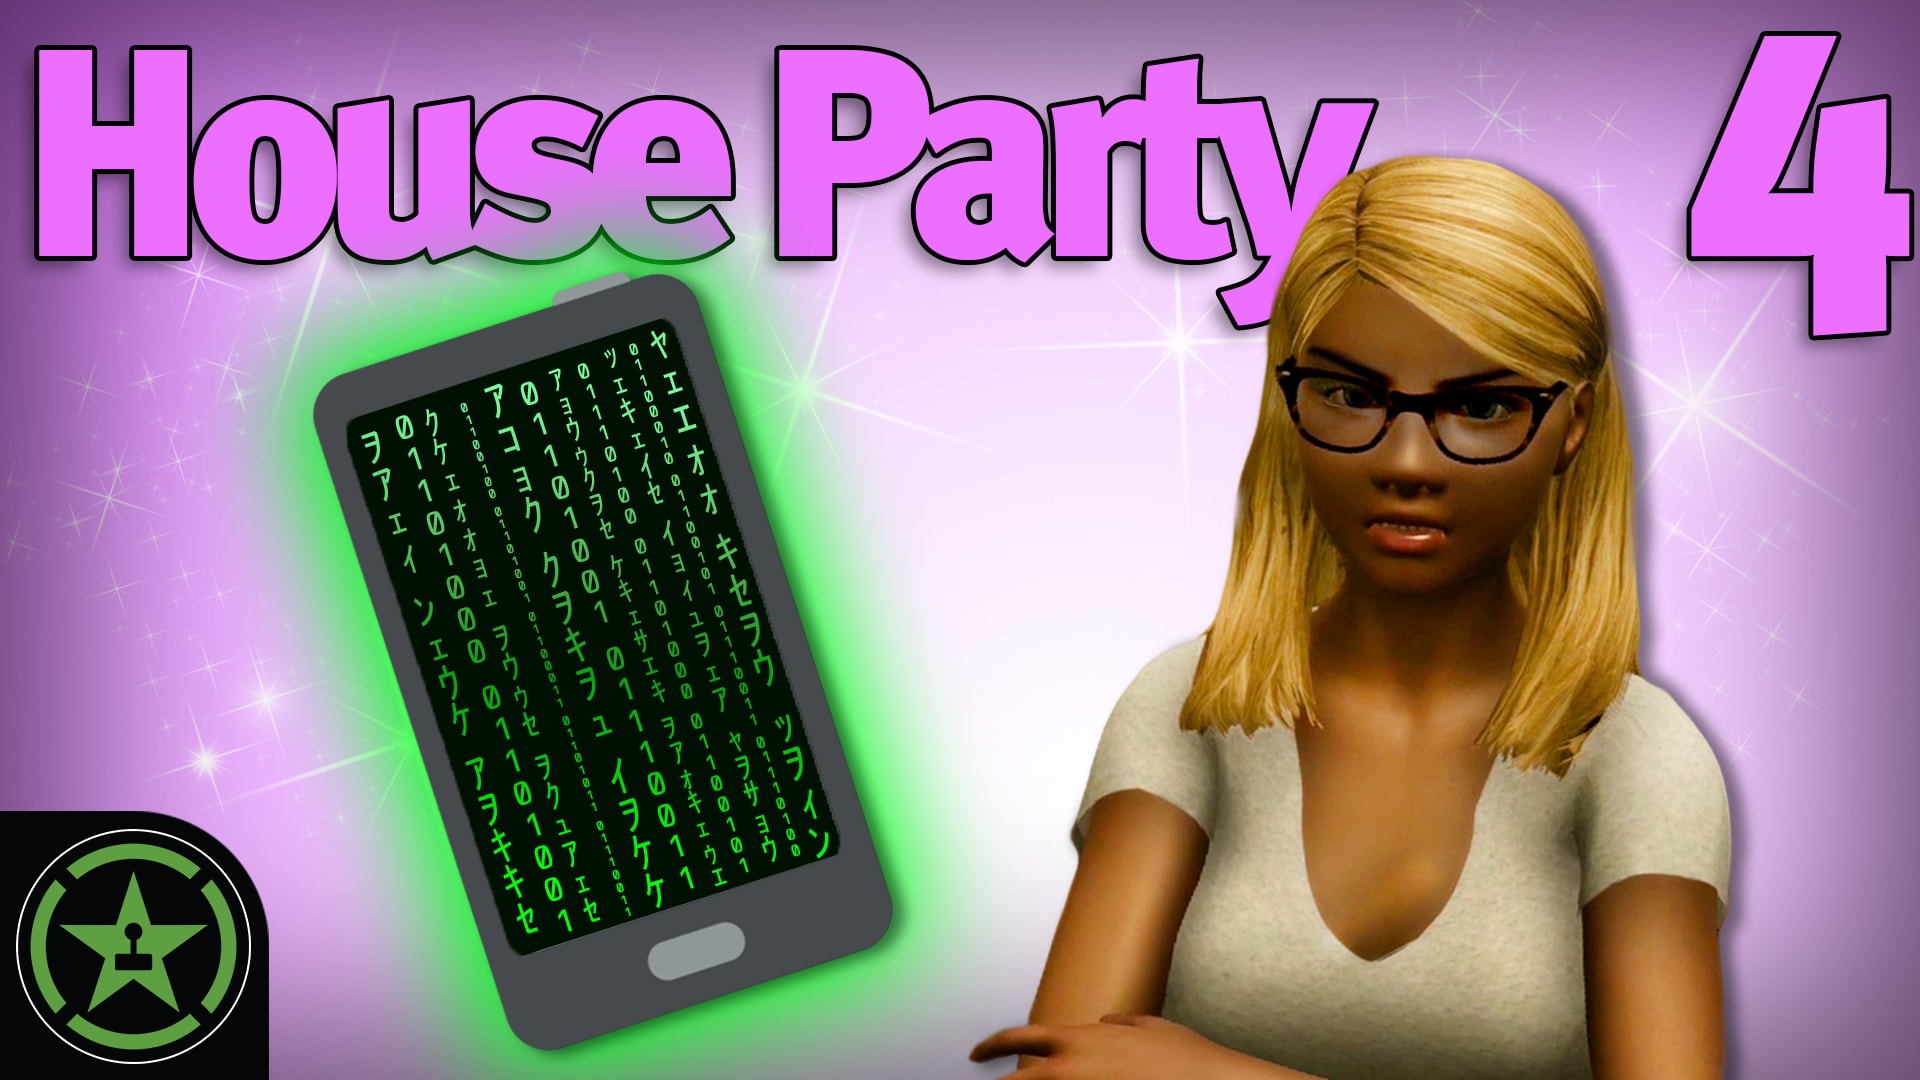 Best of House party the game unconcerned